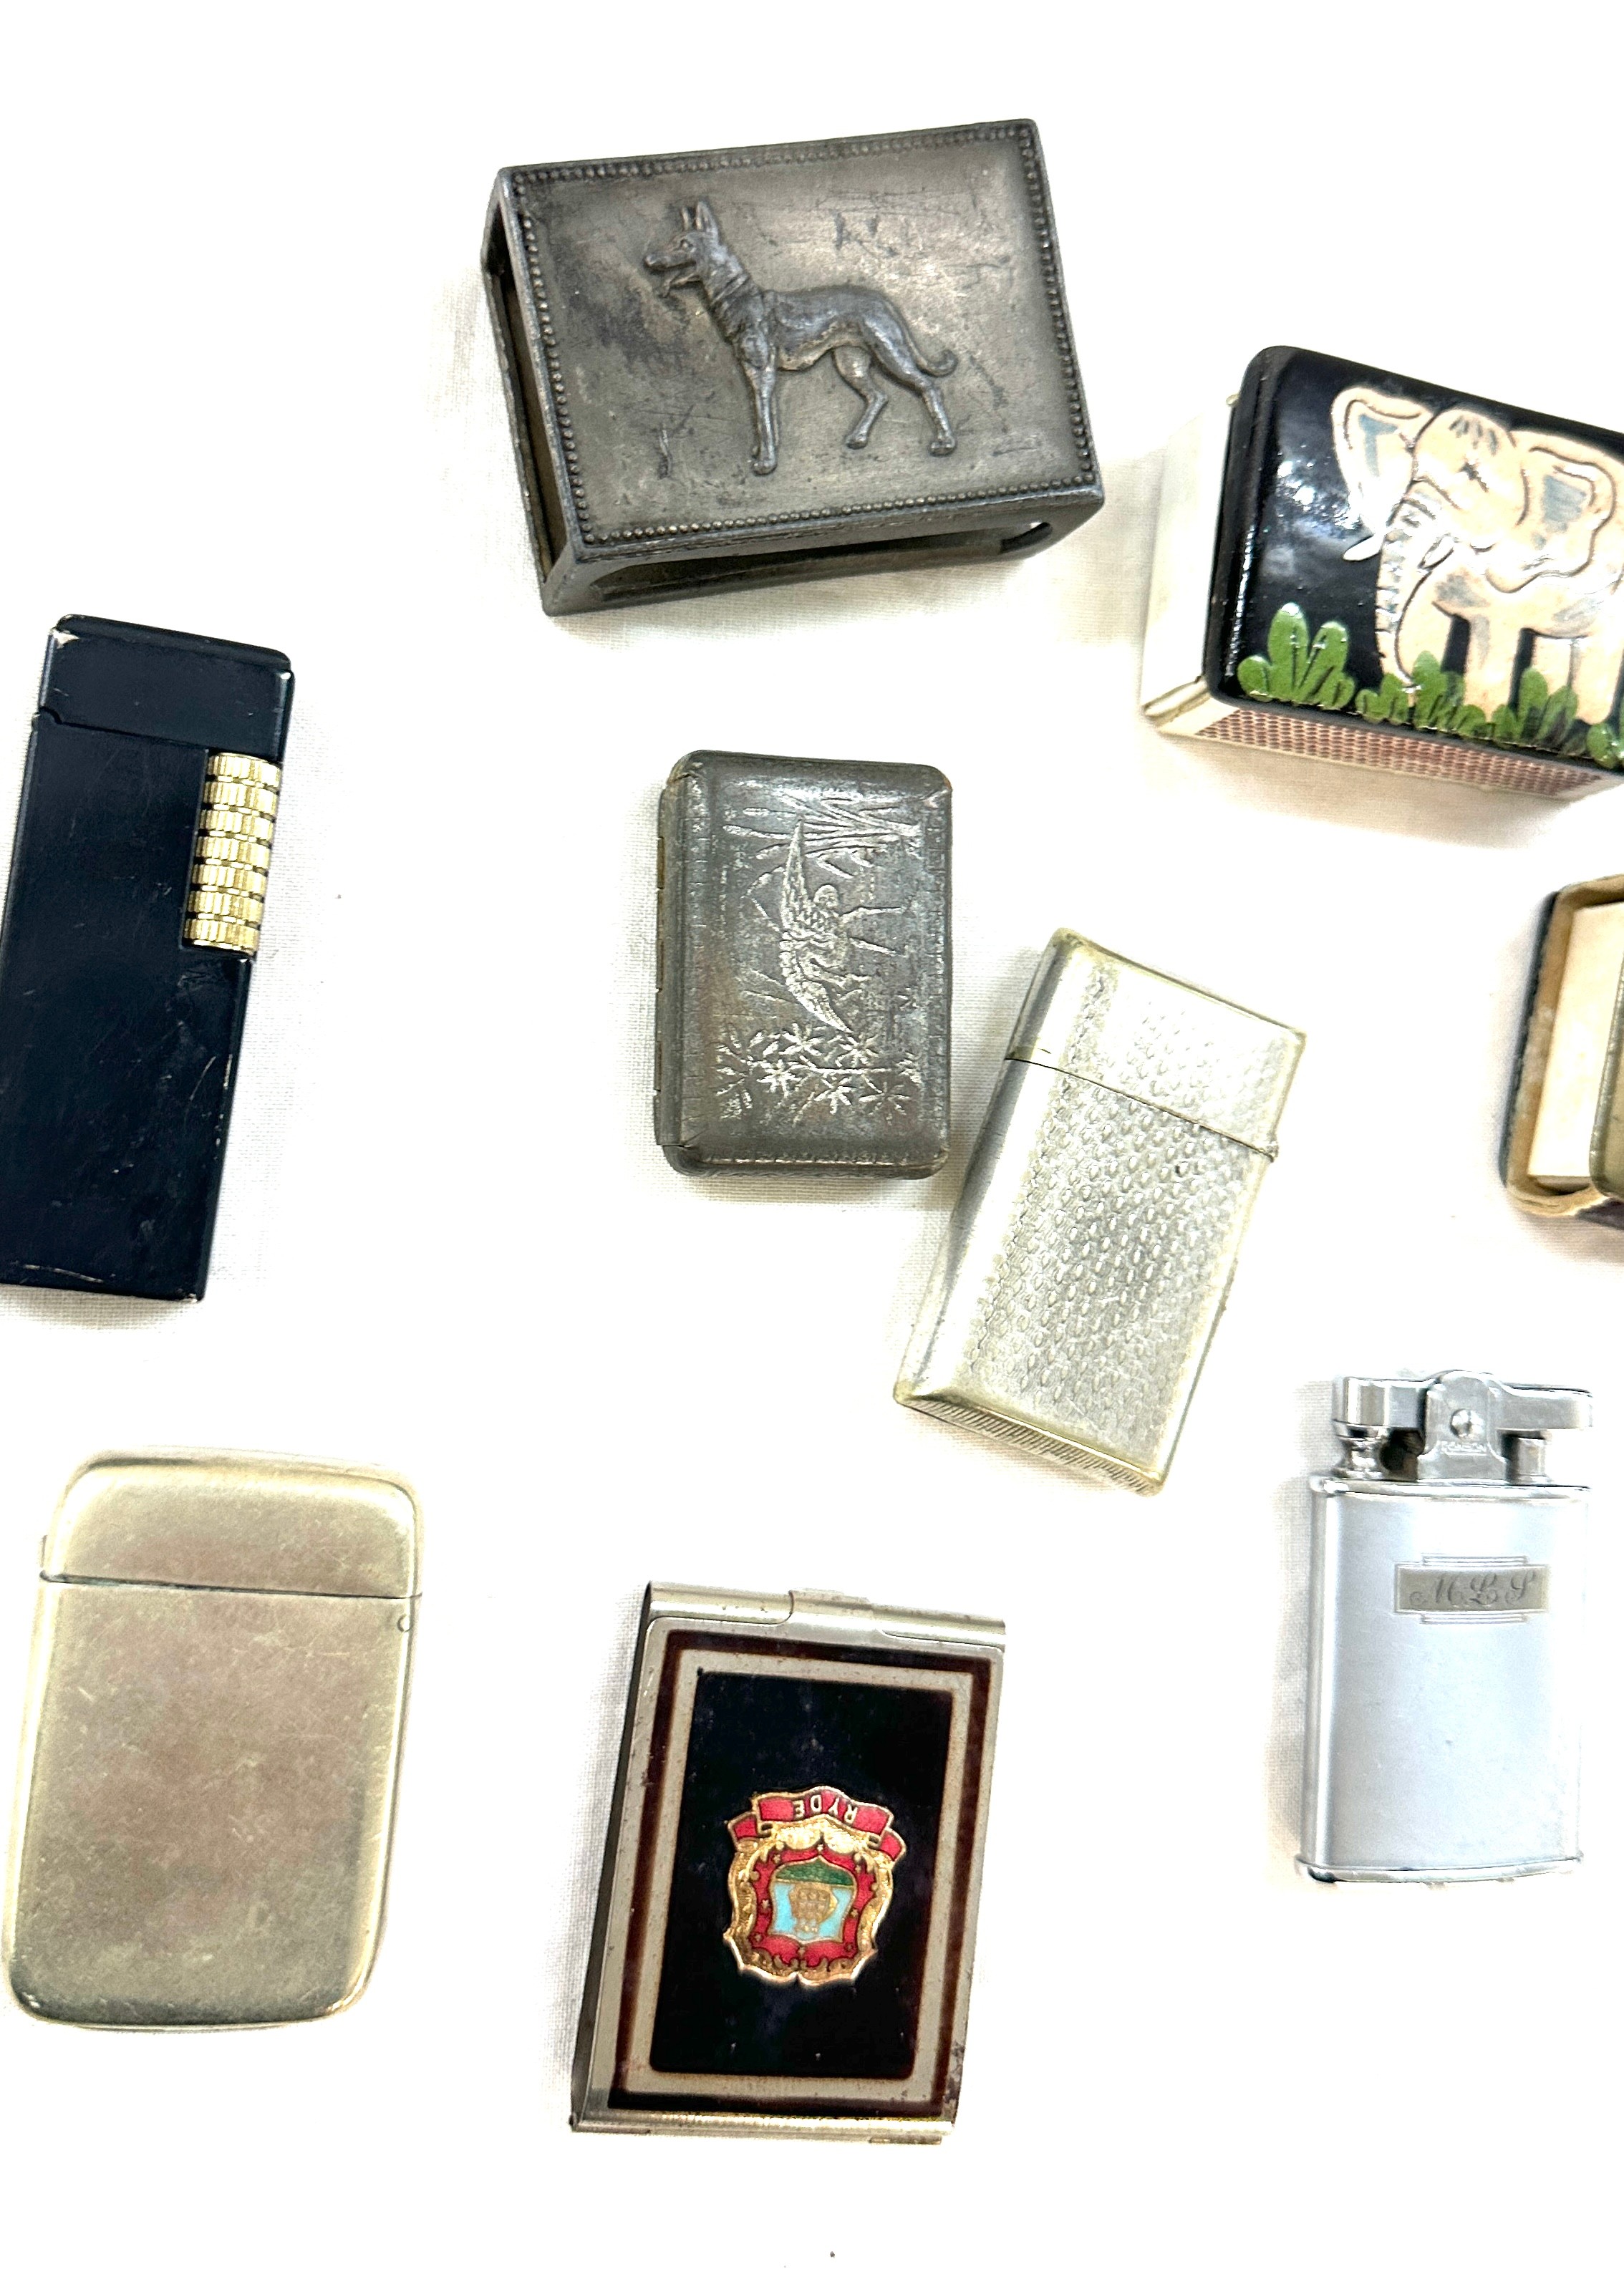 Match cases and lighters - Image 3 of 4